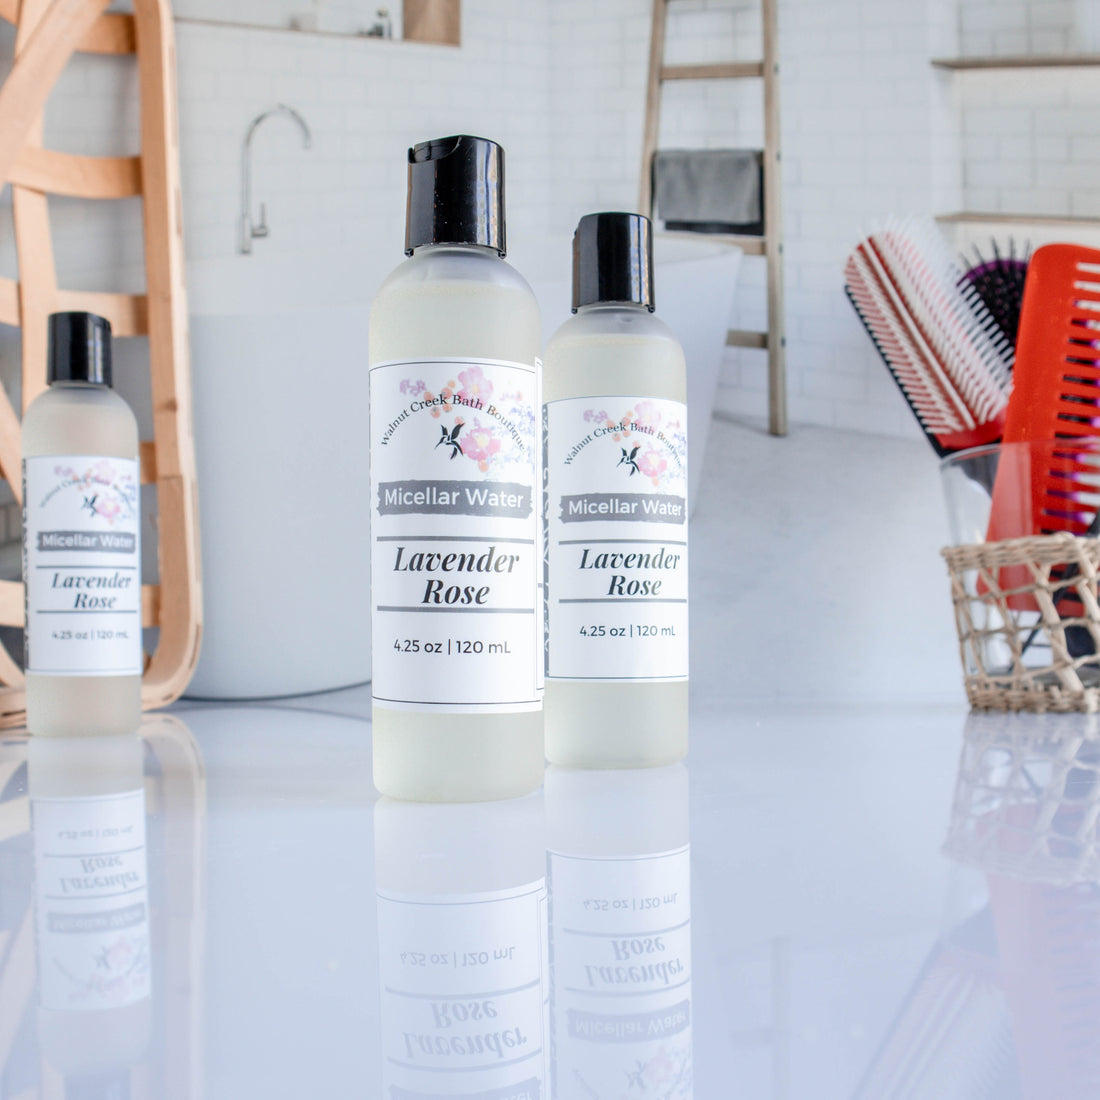 3 lavender rose micellar waters are shown, 2 closer to viewer and a third in the back left. there is a bathroom scene in that background showing a tub. there is also a  cup with hair brushes and combs in the back right.